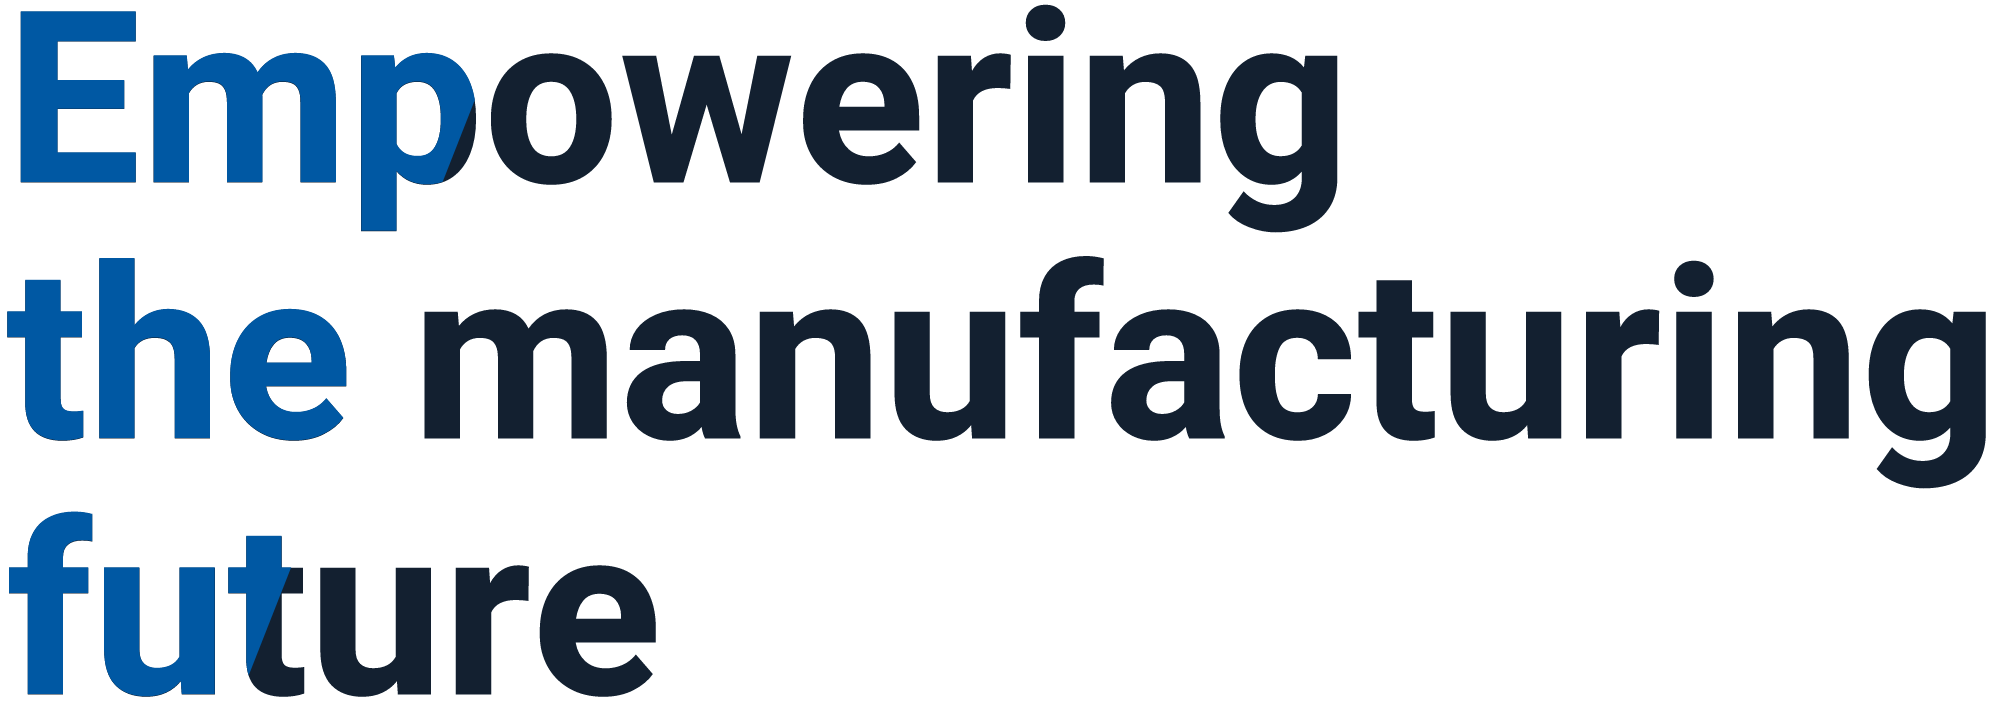 Empowering the manufacturing future